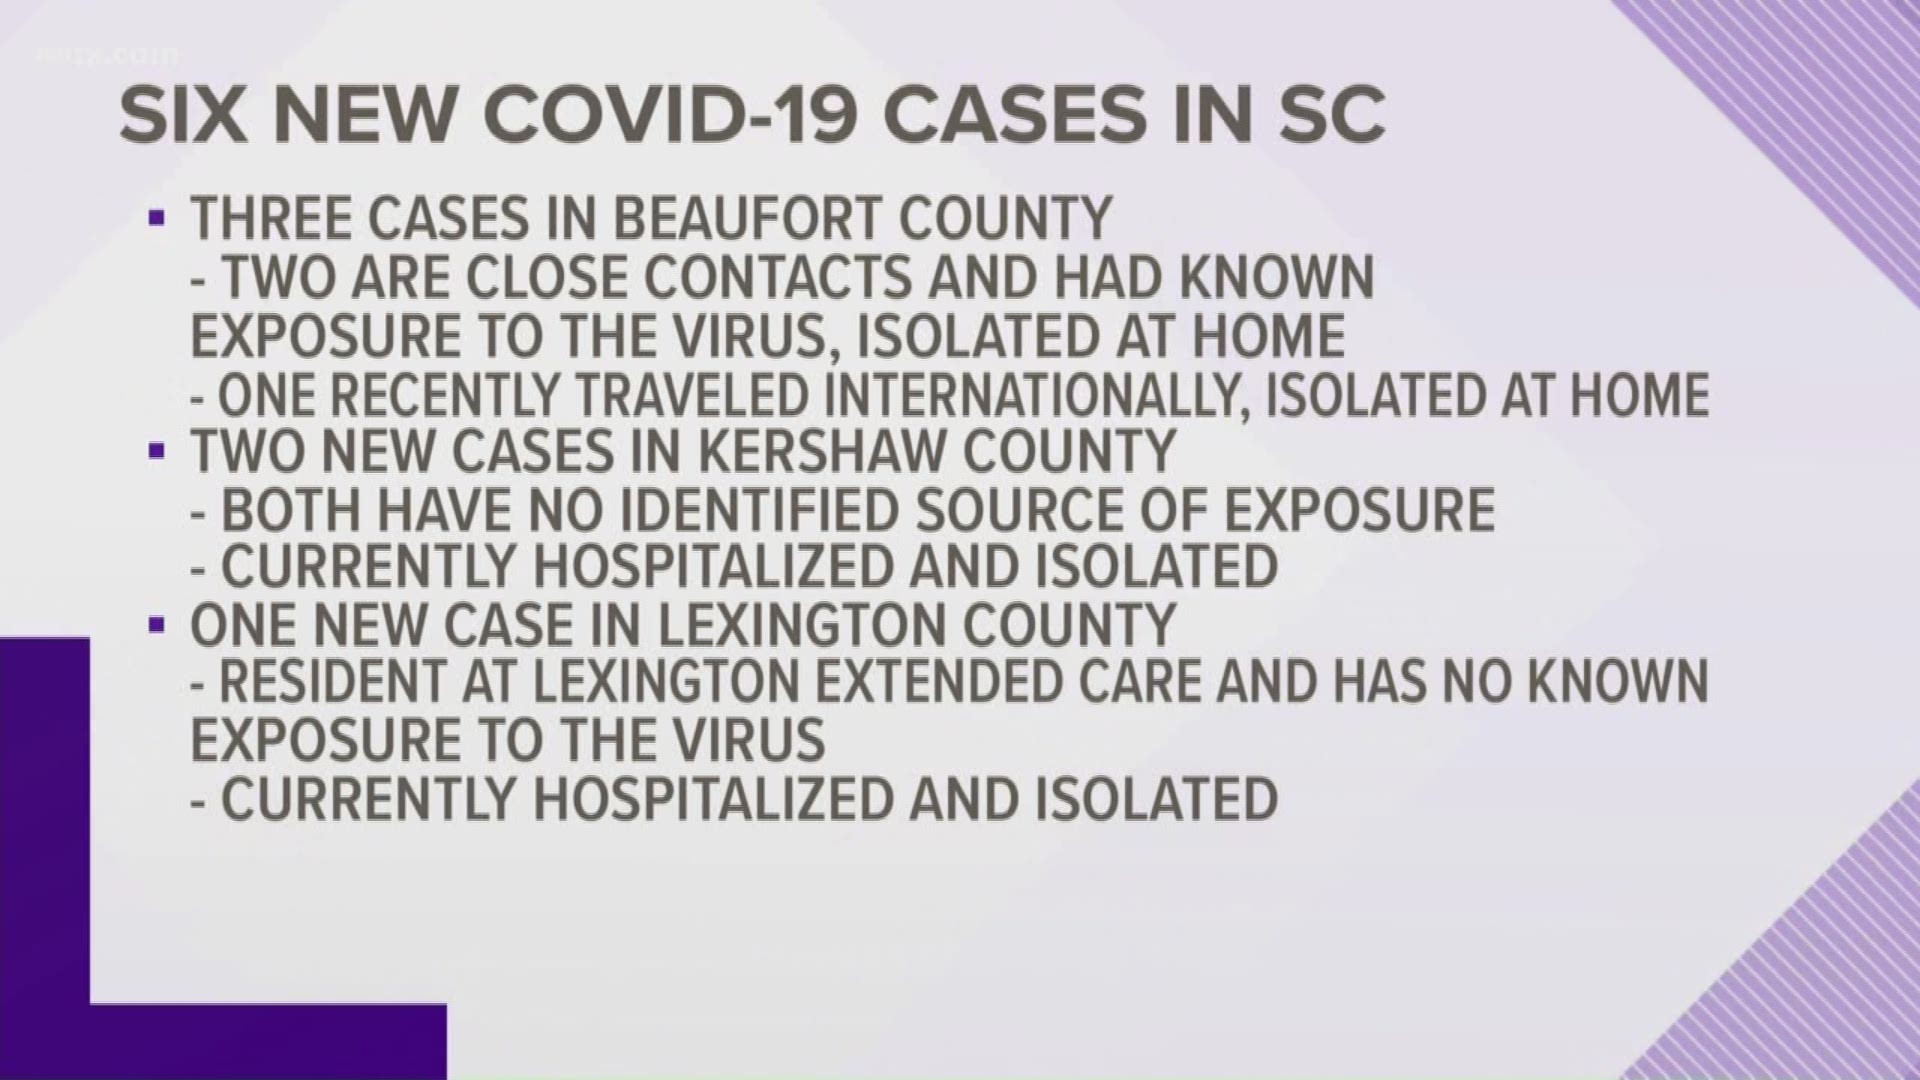 The cases are in Kershaw, Beaufort, Lancaster, Charleston, Spartanburg, and Lexington Counties.